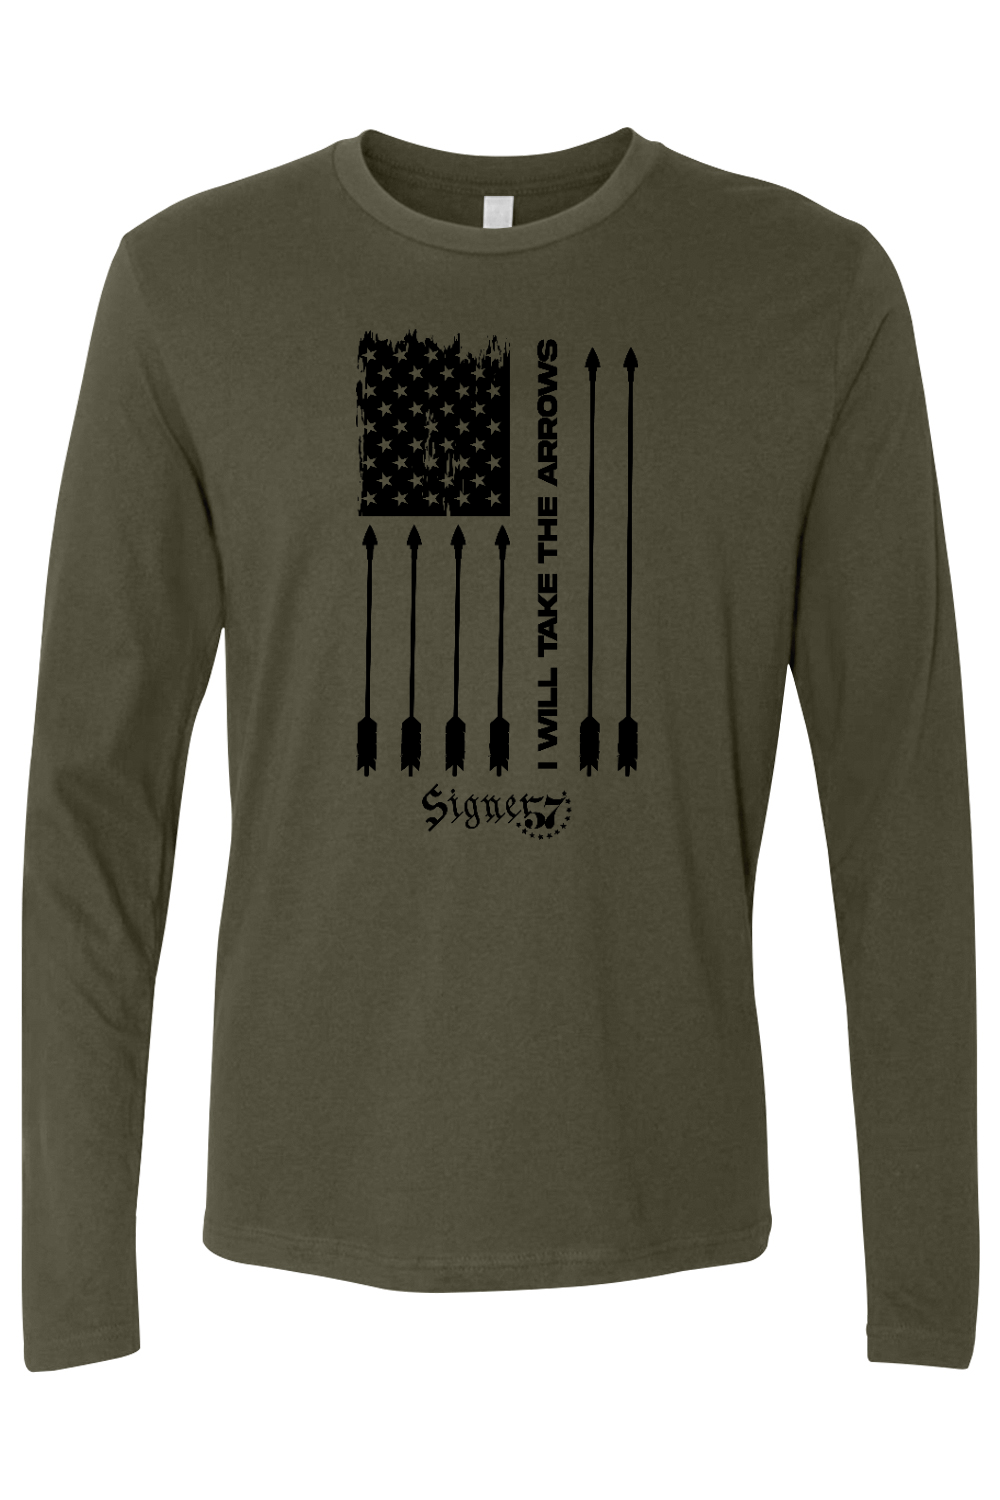 UNISEX Long Sleeve Shirt - I Will Take the Arrows